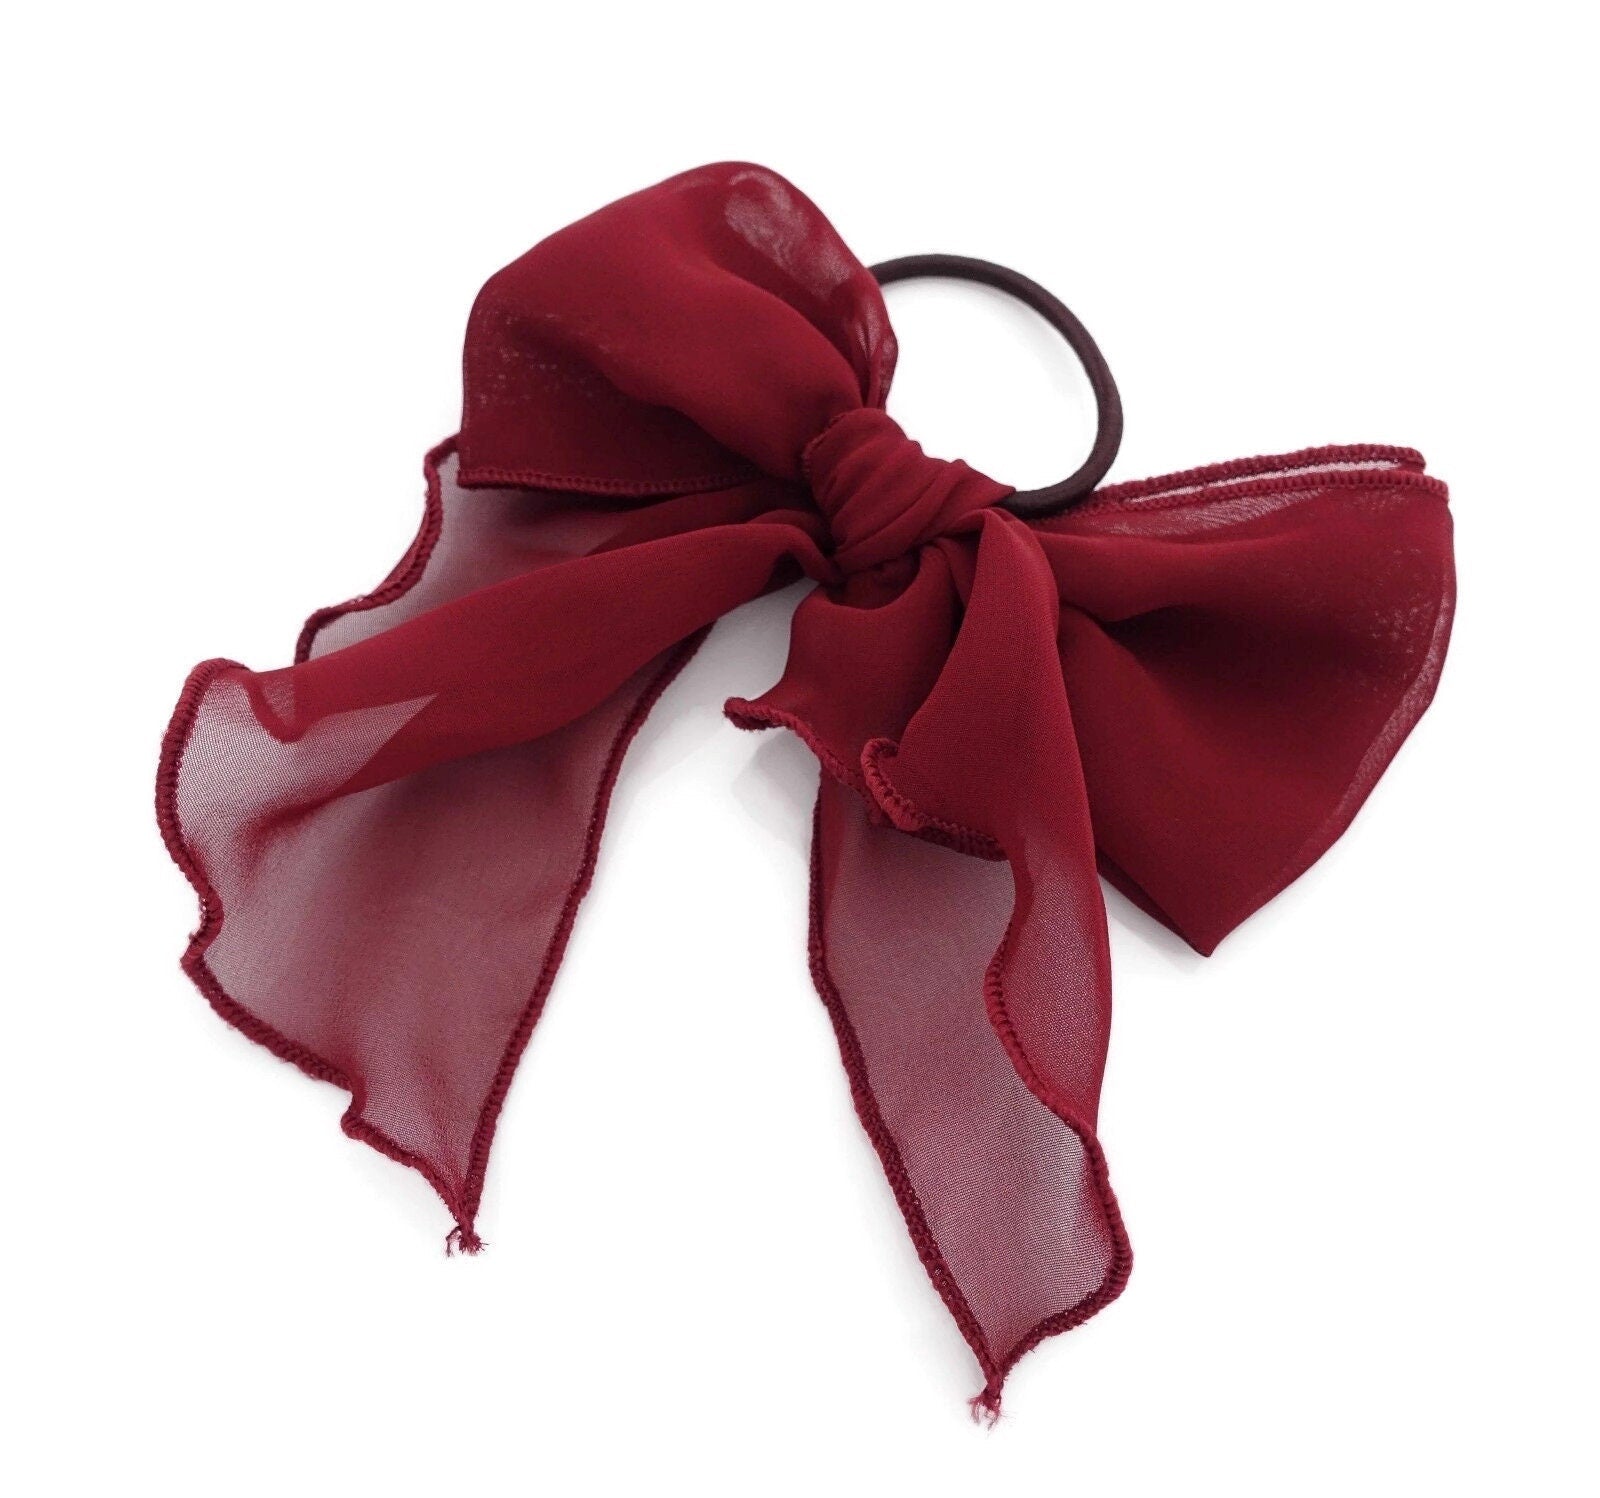 veryshine.com Scrunchies Red wine Chiffon solid color bow knot hair tie elastic ponytail holder for women